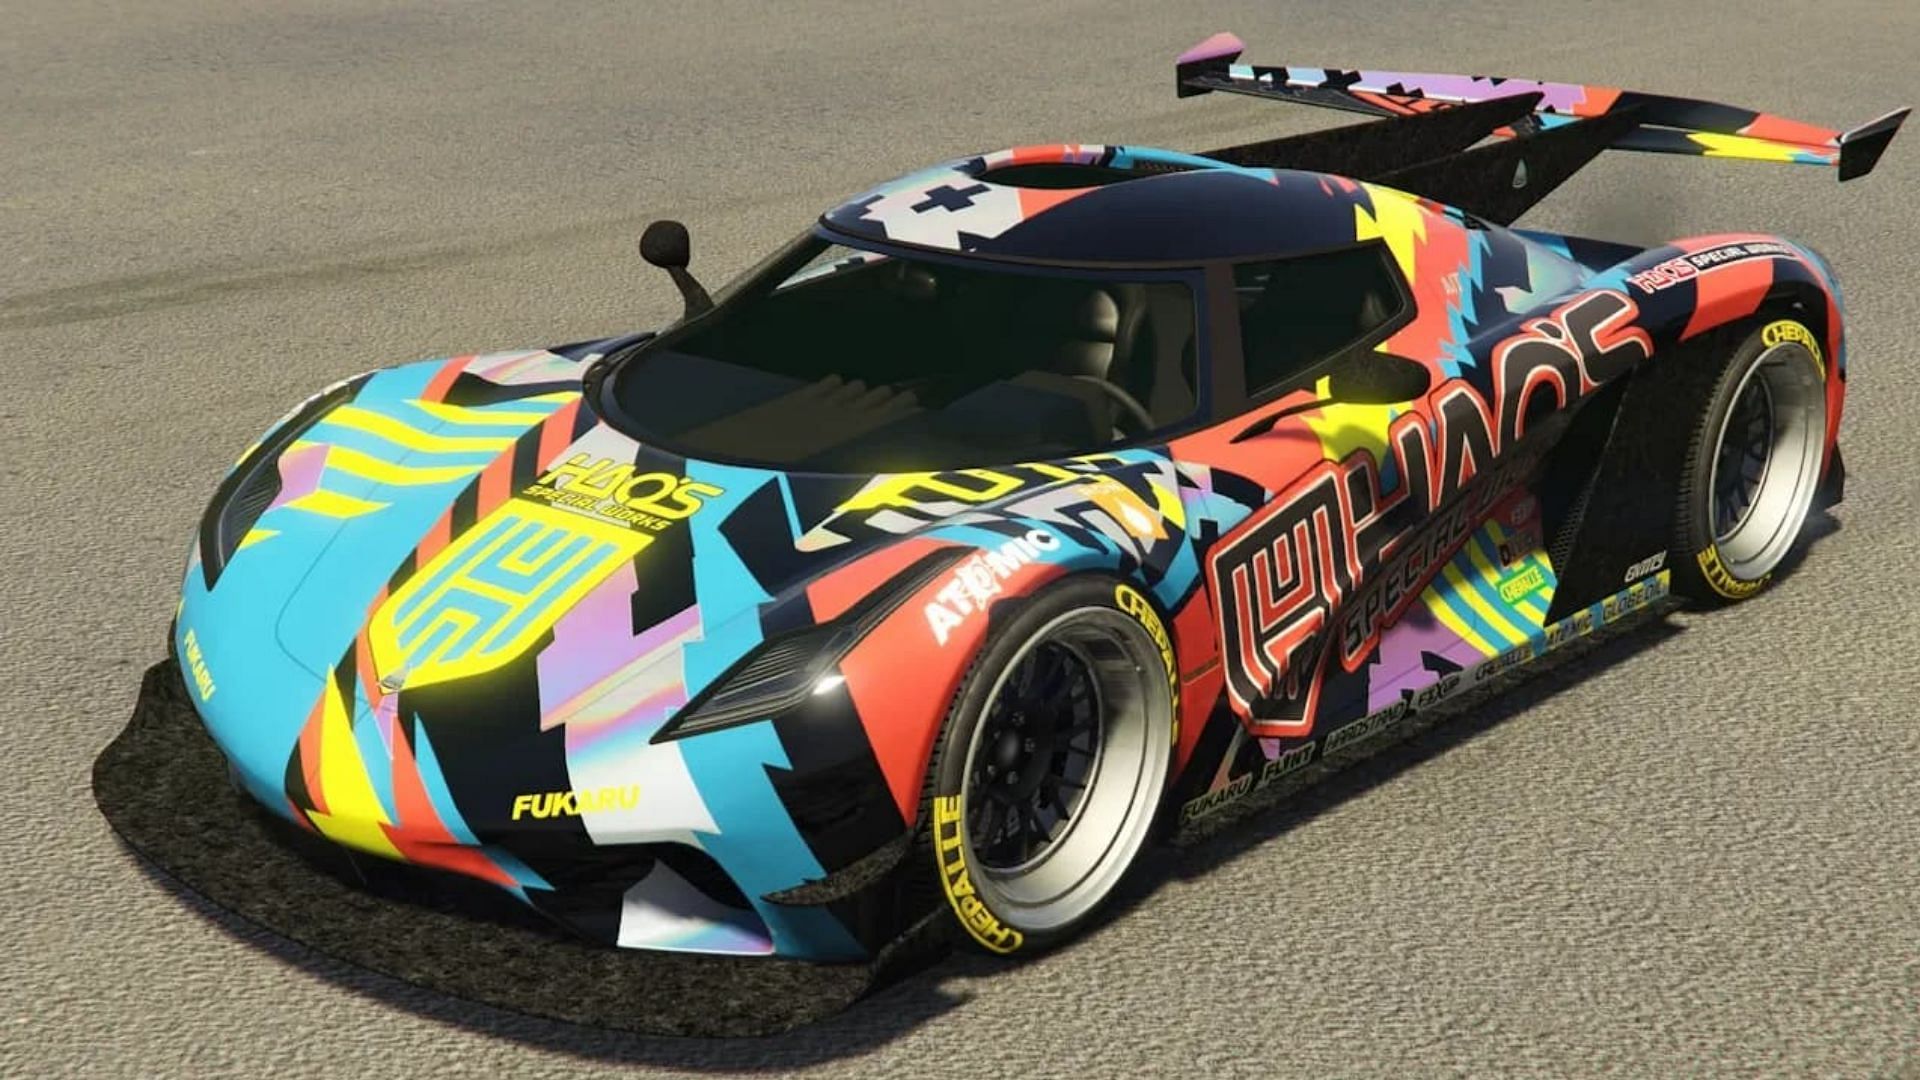 This car has the usual Hao&#039;s Special Works livery (Image via Rockstar Games)